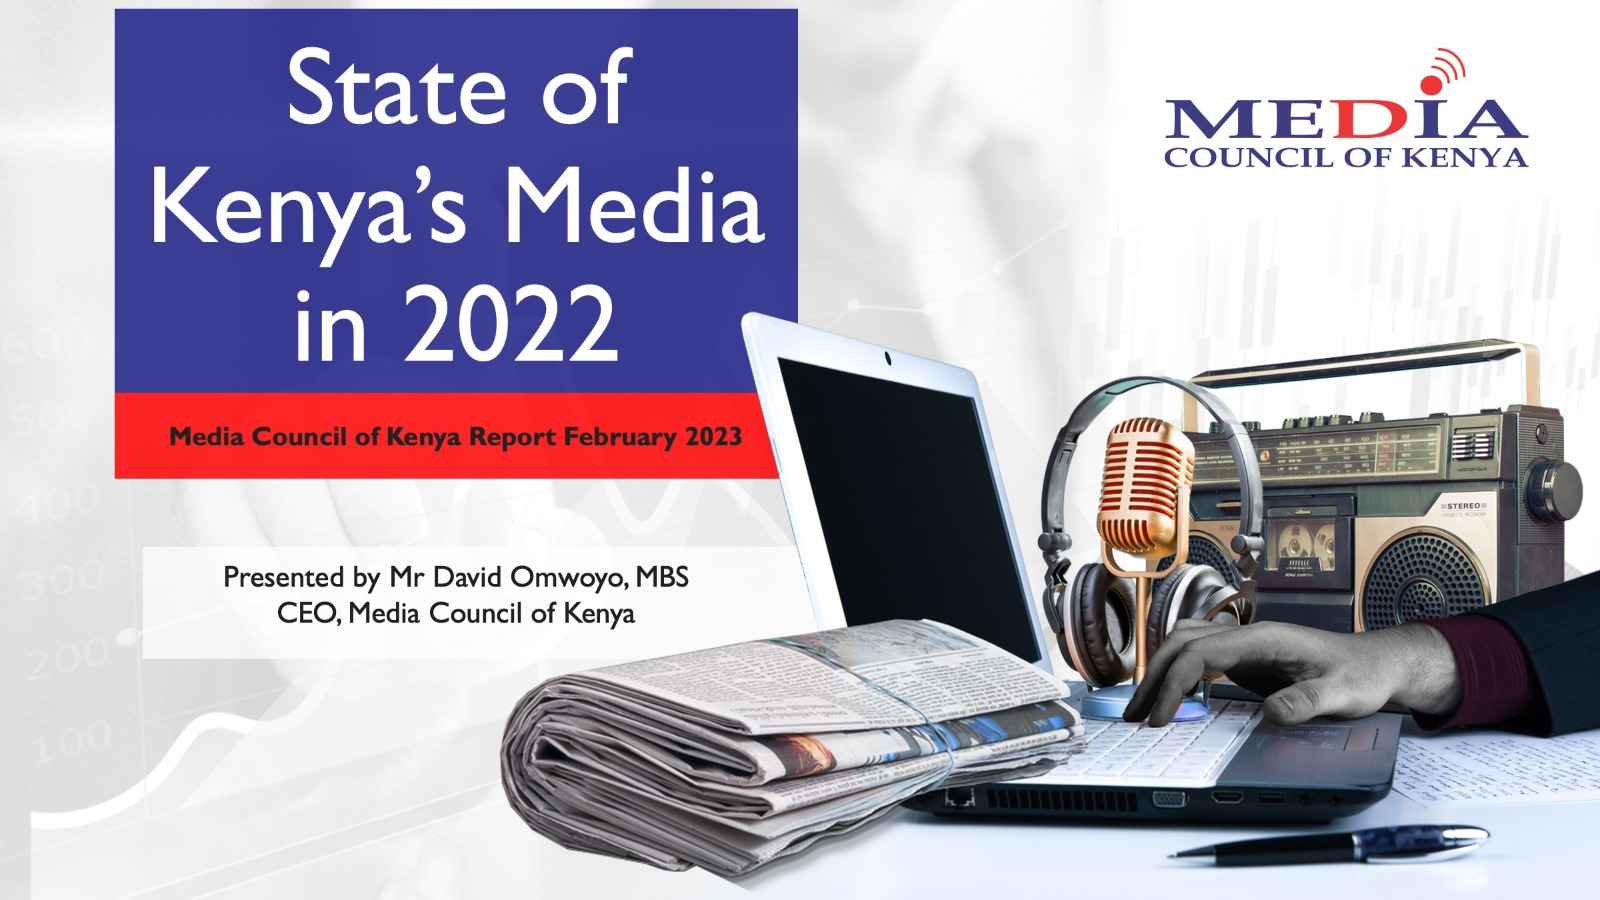 STATE OF THE MEDIA REPORT 2022